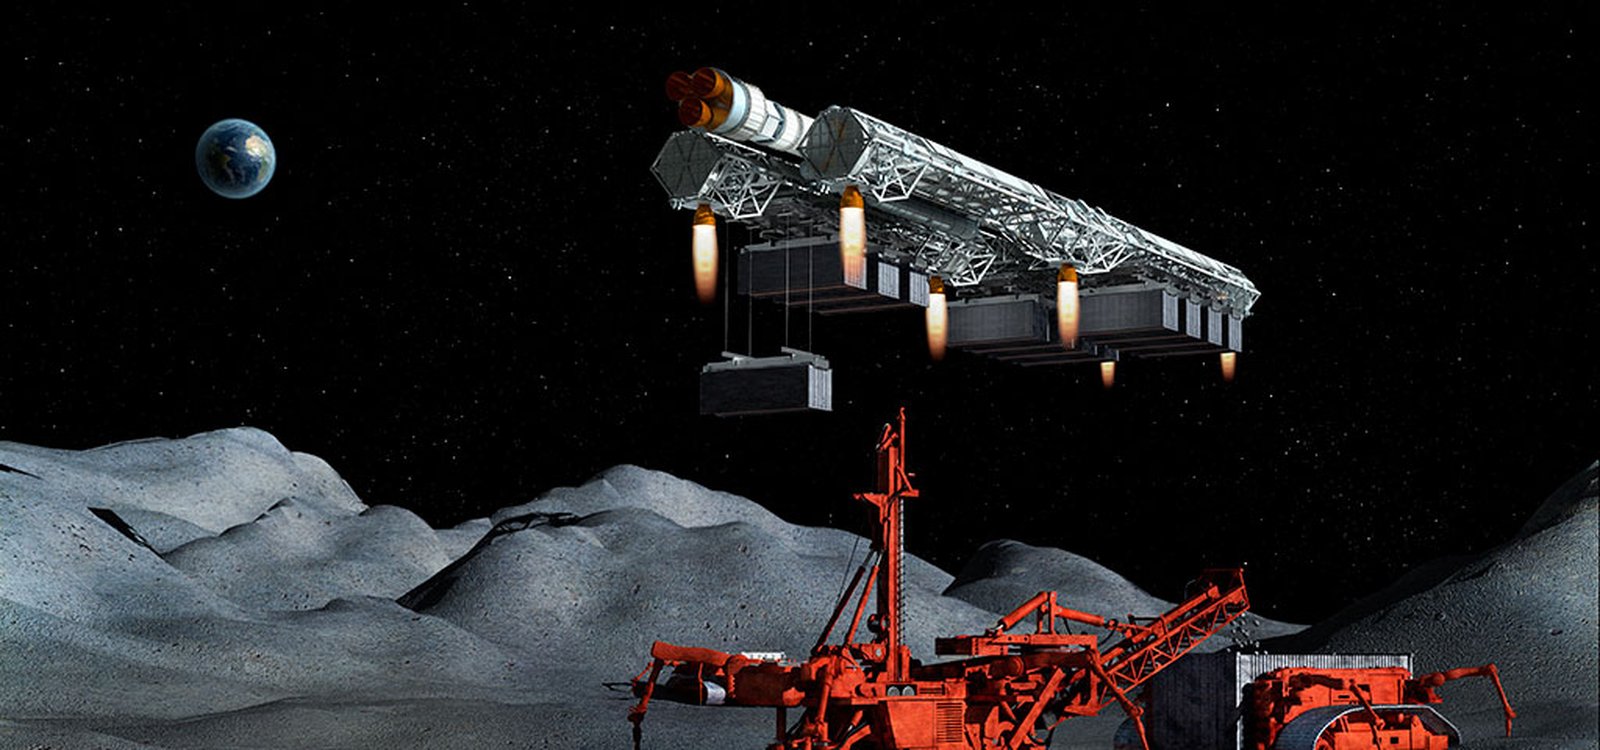 <p>Theoretically, there are many ways to extract the essential elements  from asteroids, including strip mining, shaft mining, heating and magnetic rakes for mining heavy metals.</p>
